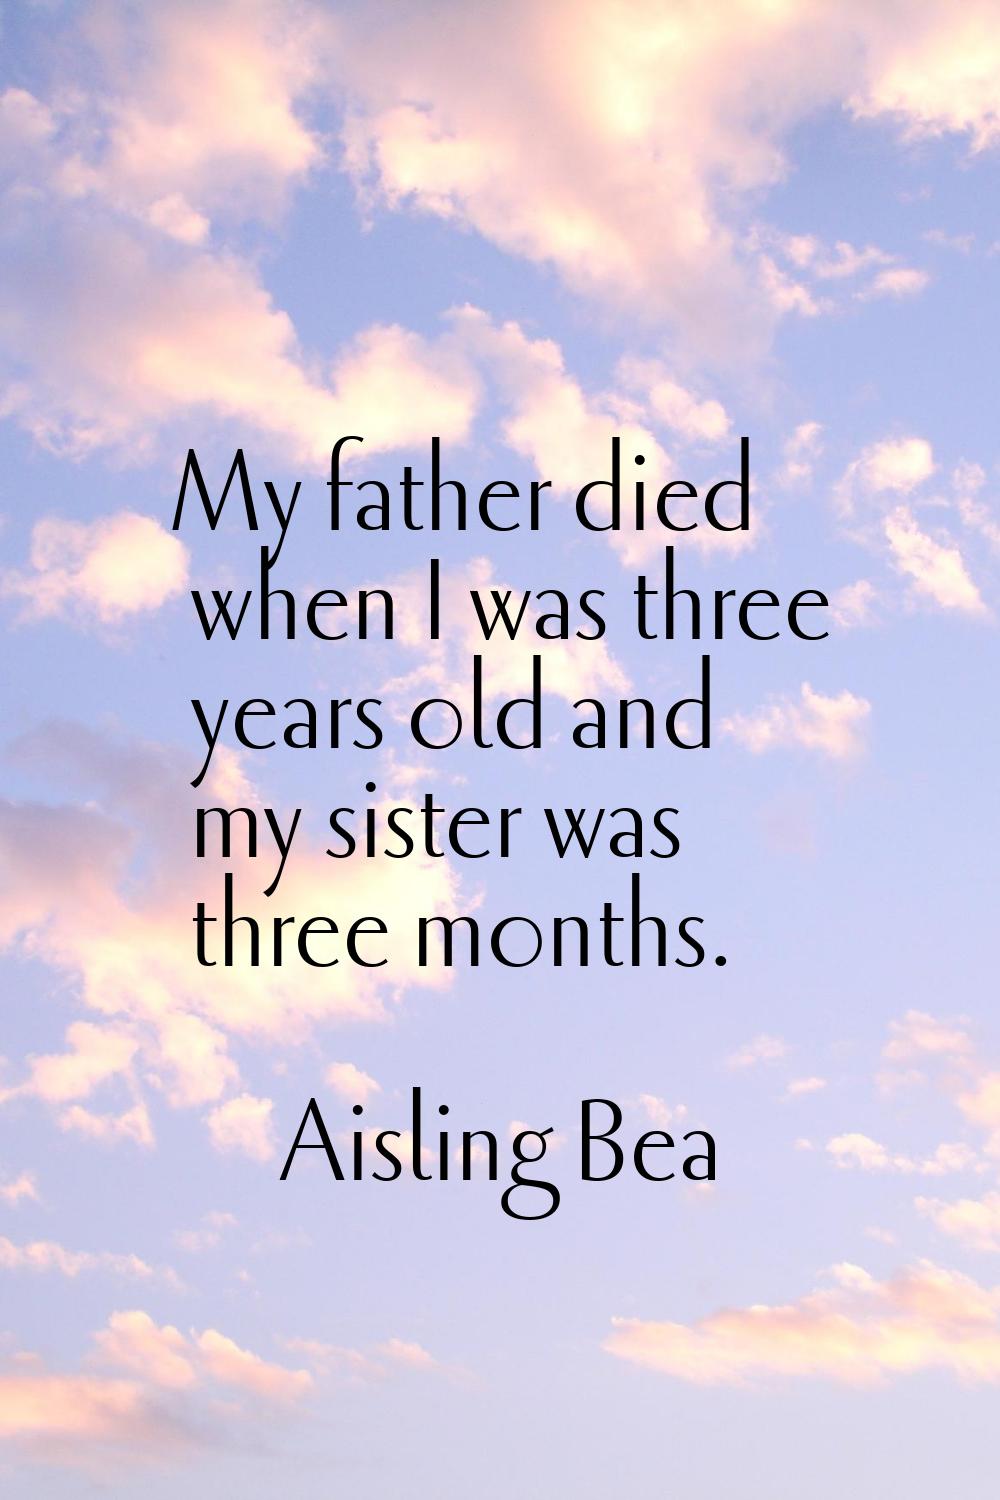 My father died when I was three years old and my sister was three months.